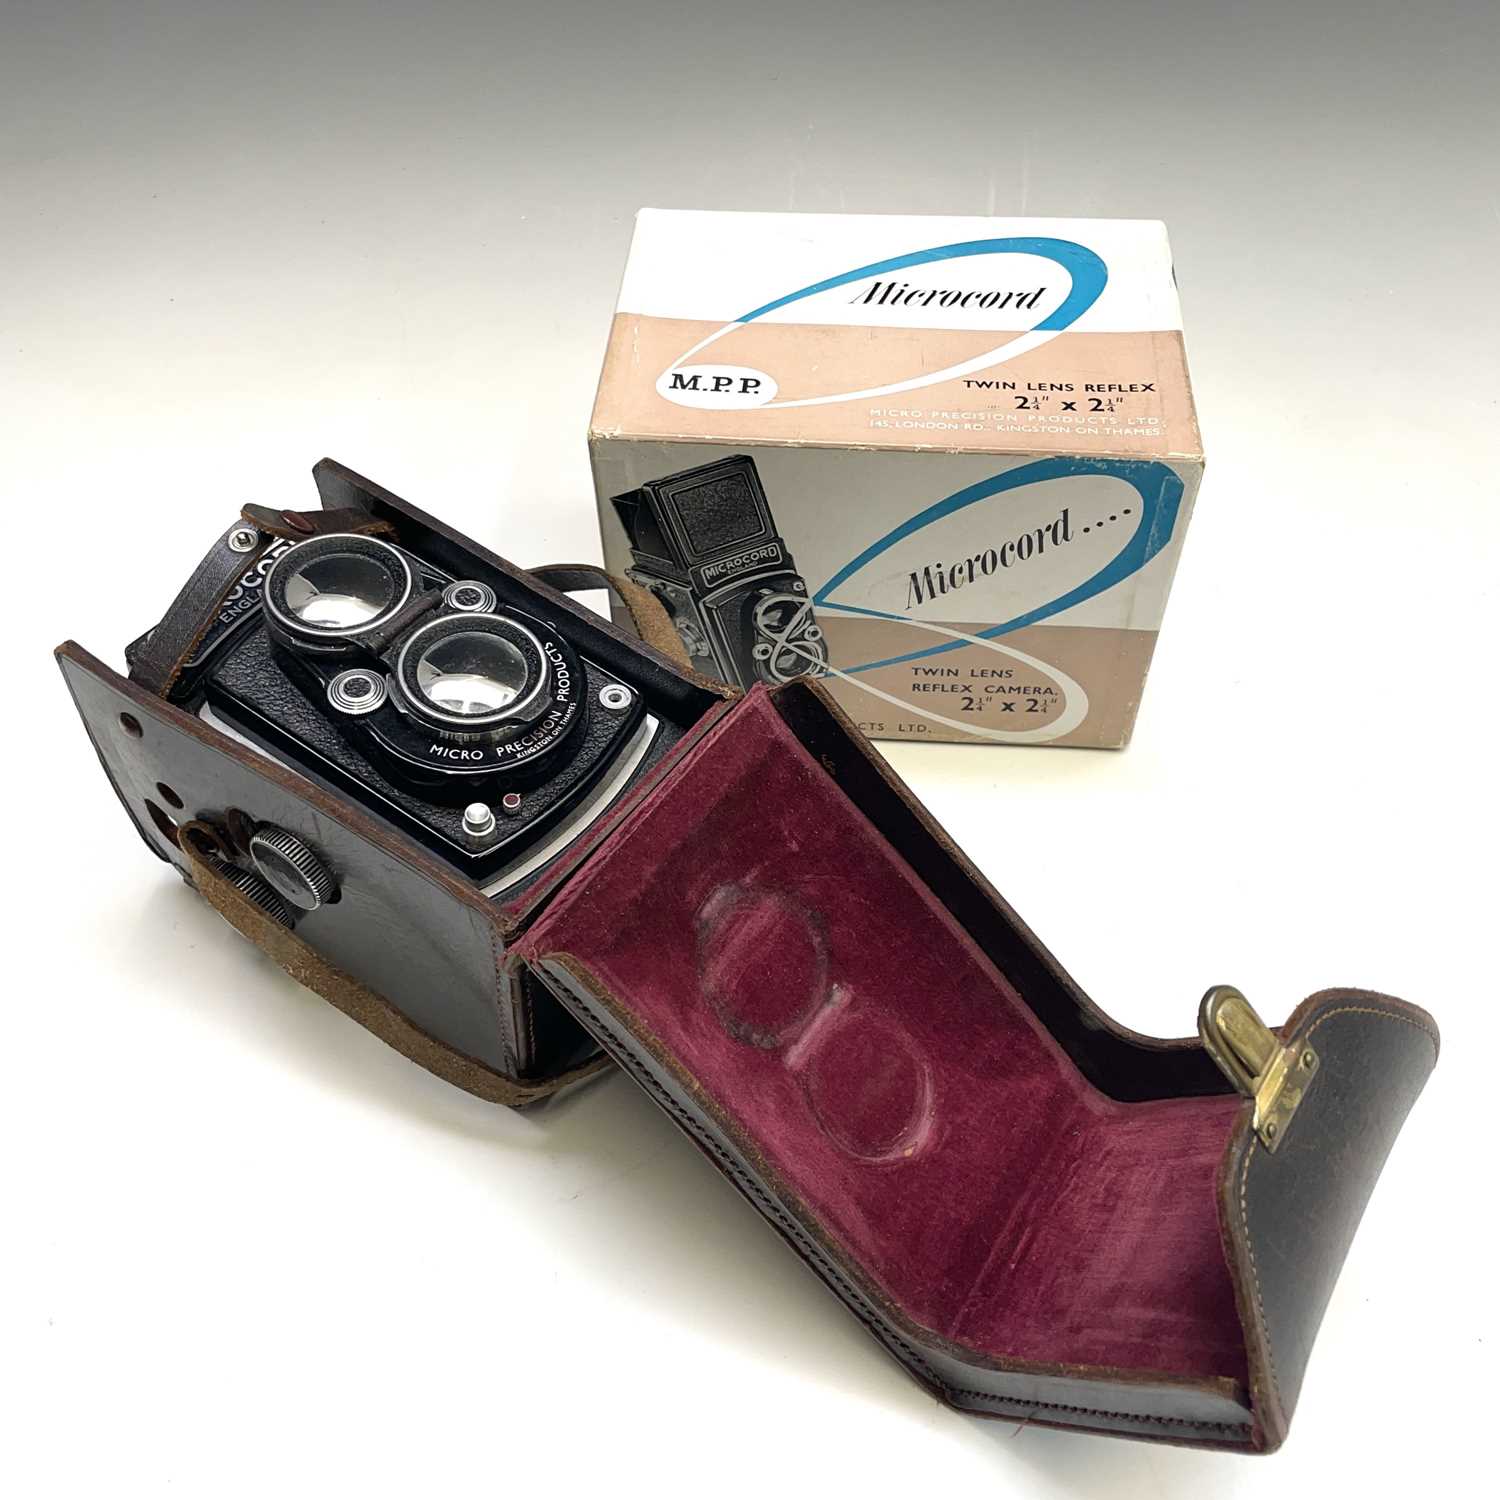 Microcord Twin Reflex camera in leather case with original box.Condition report: The shutter is in